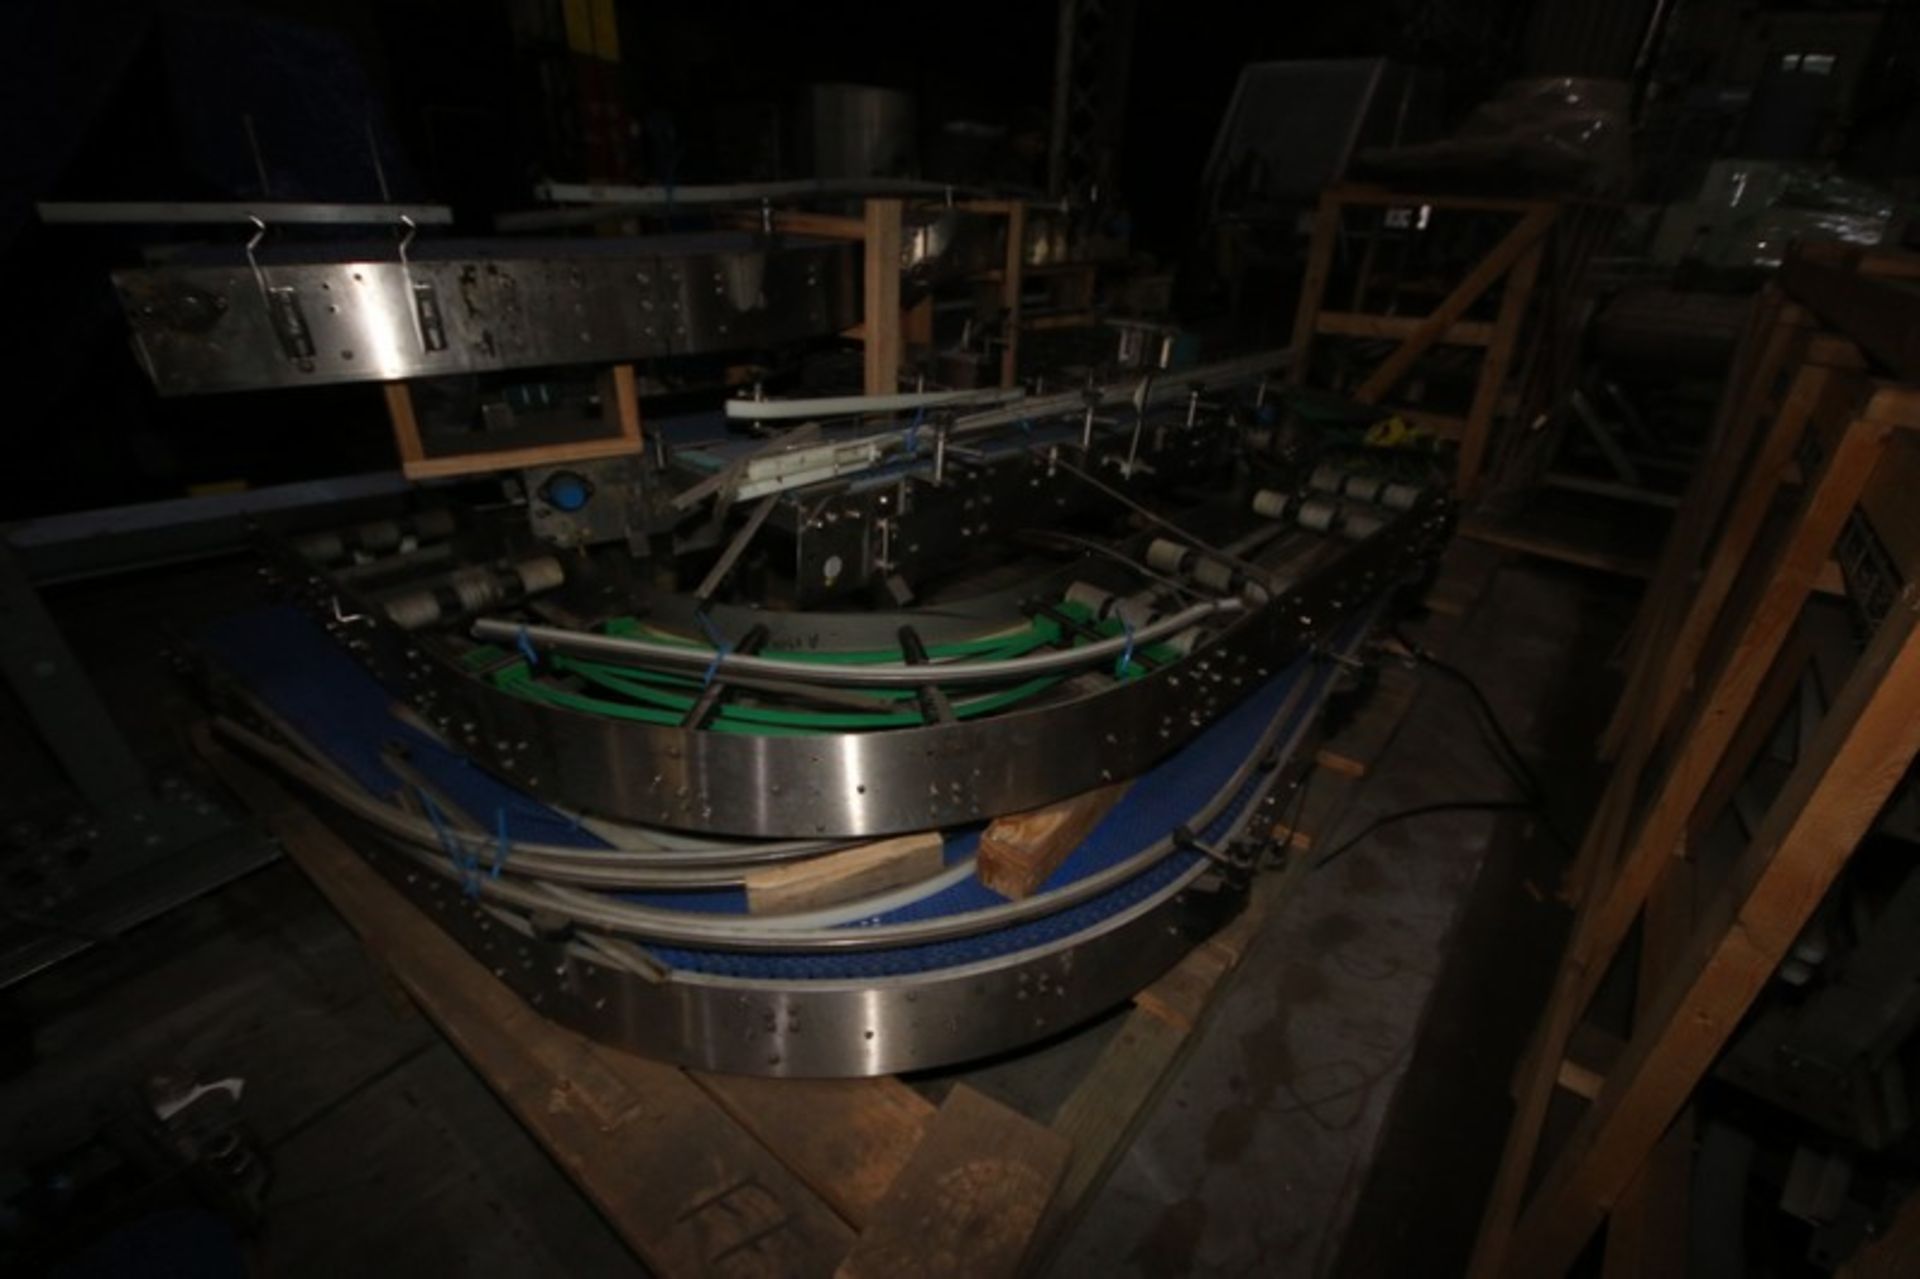 Skid with Assorted S/S Case Conveyor Sections, Most Aprox. 12" W with Intralux Belt - Image 2 of 6